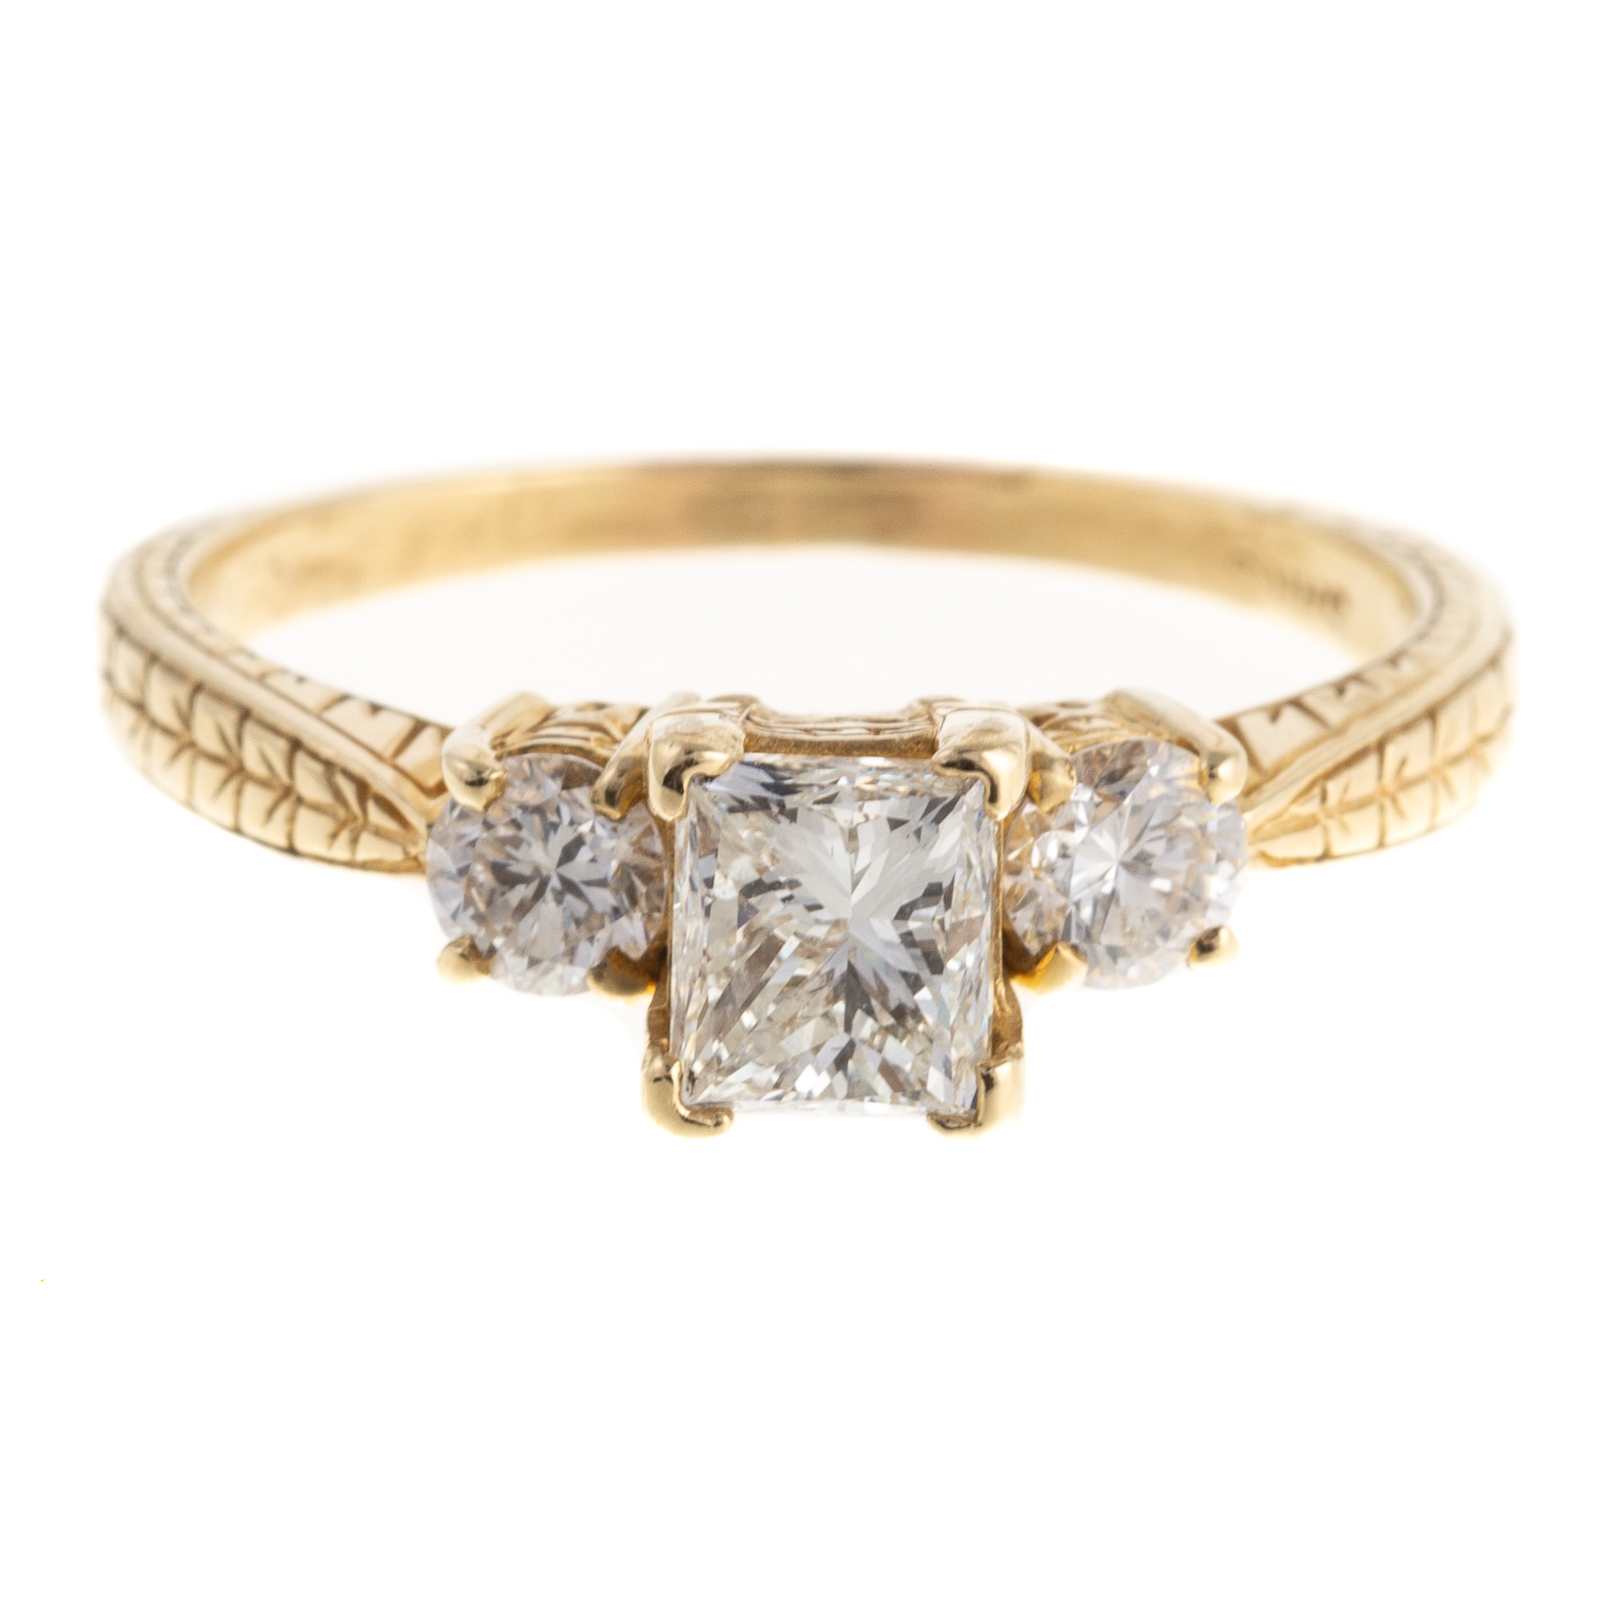 A DIAMOND ENGAGEMENT RING IN 18K 334802